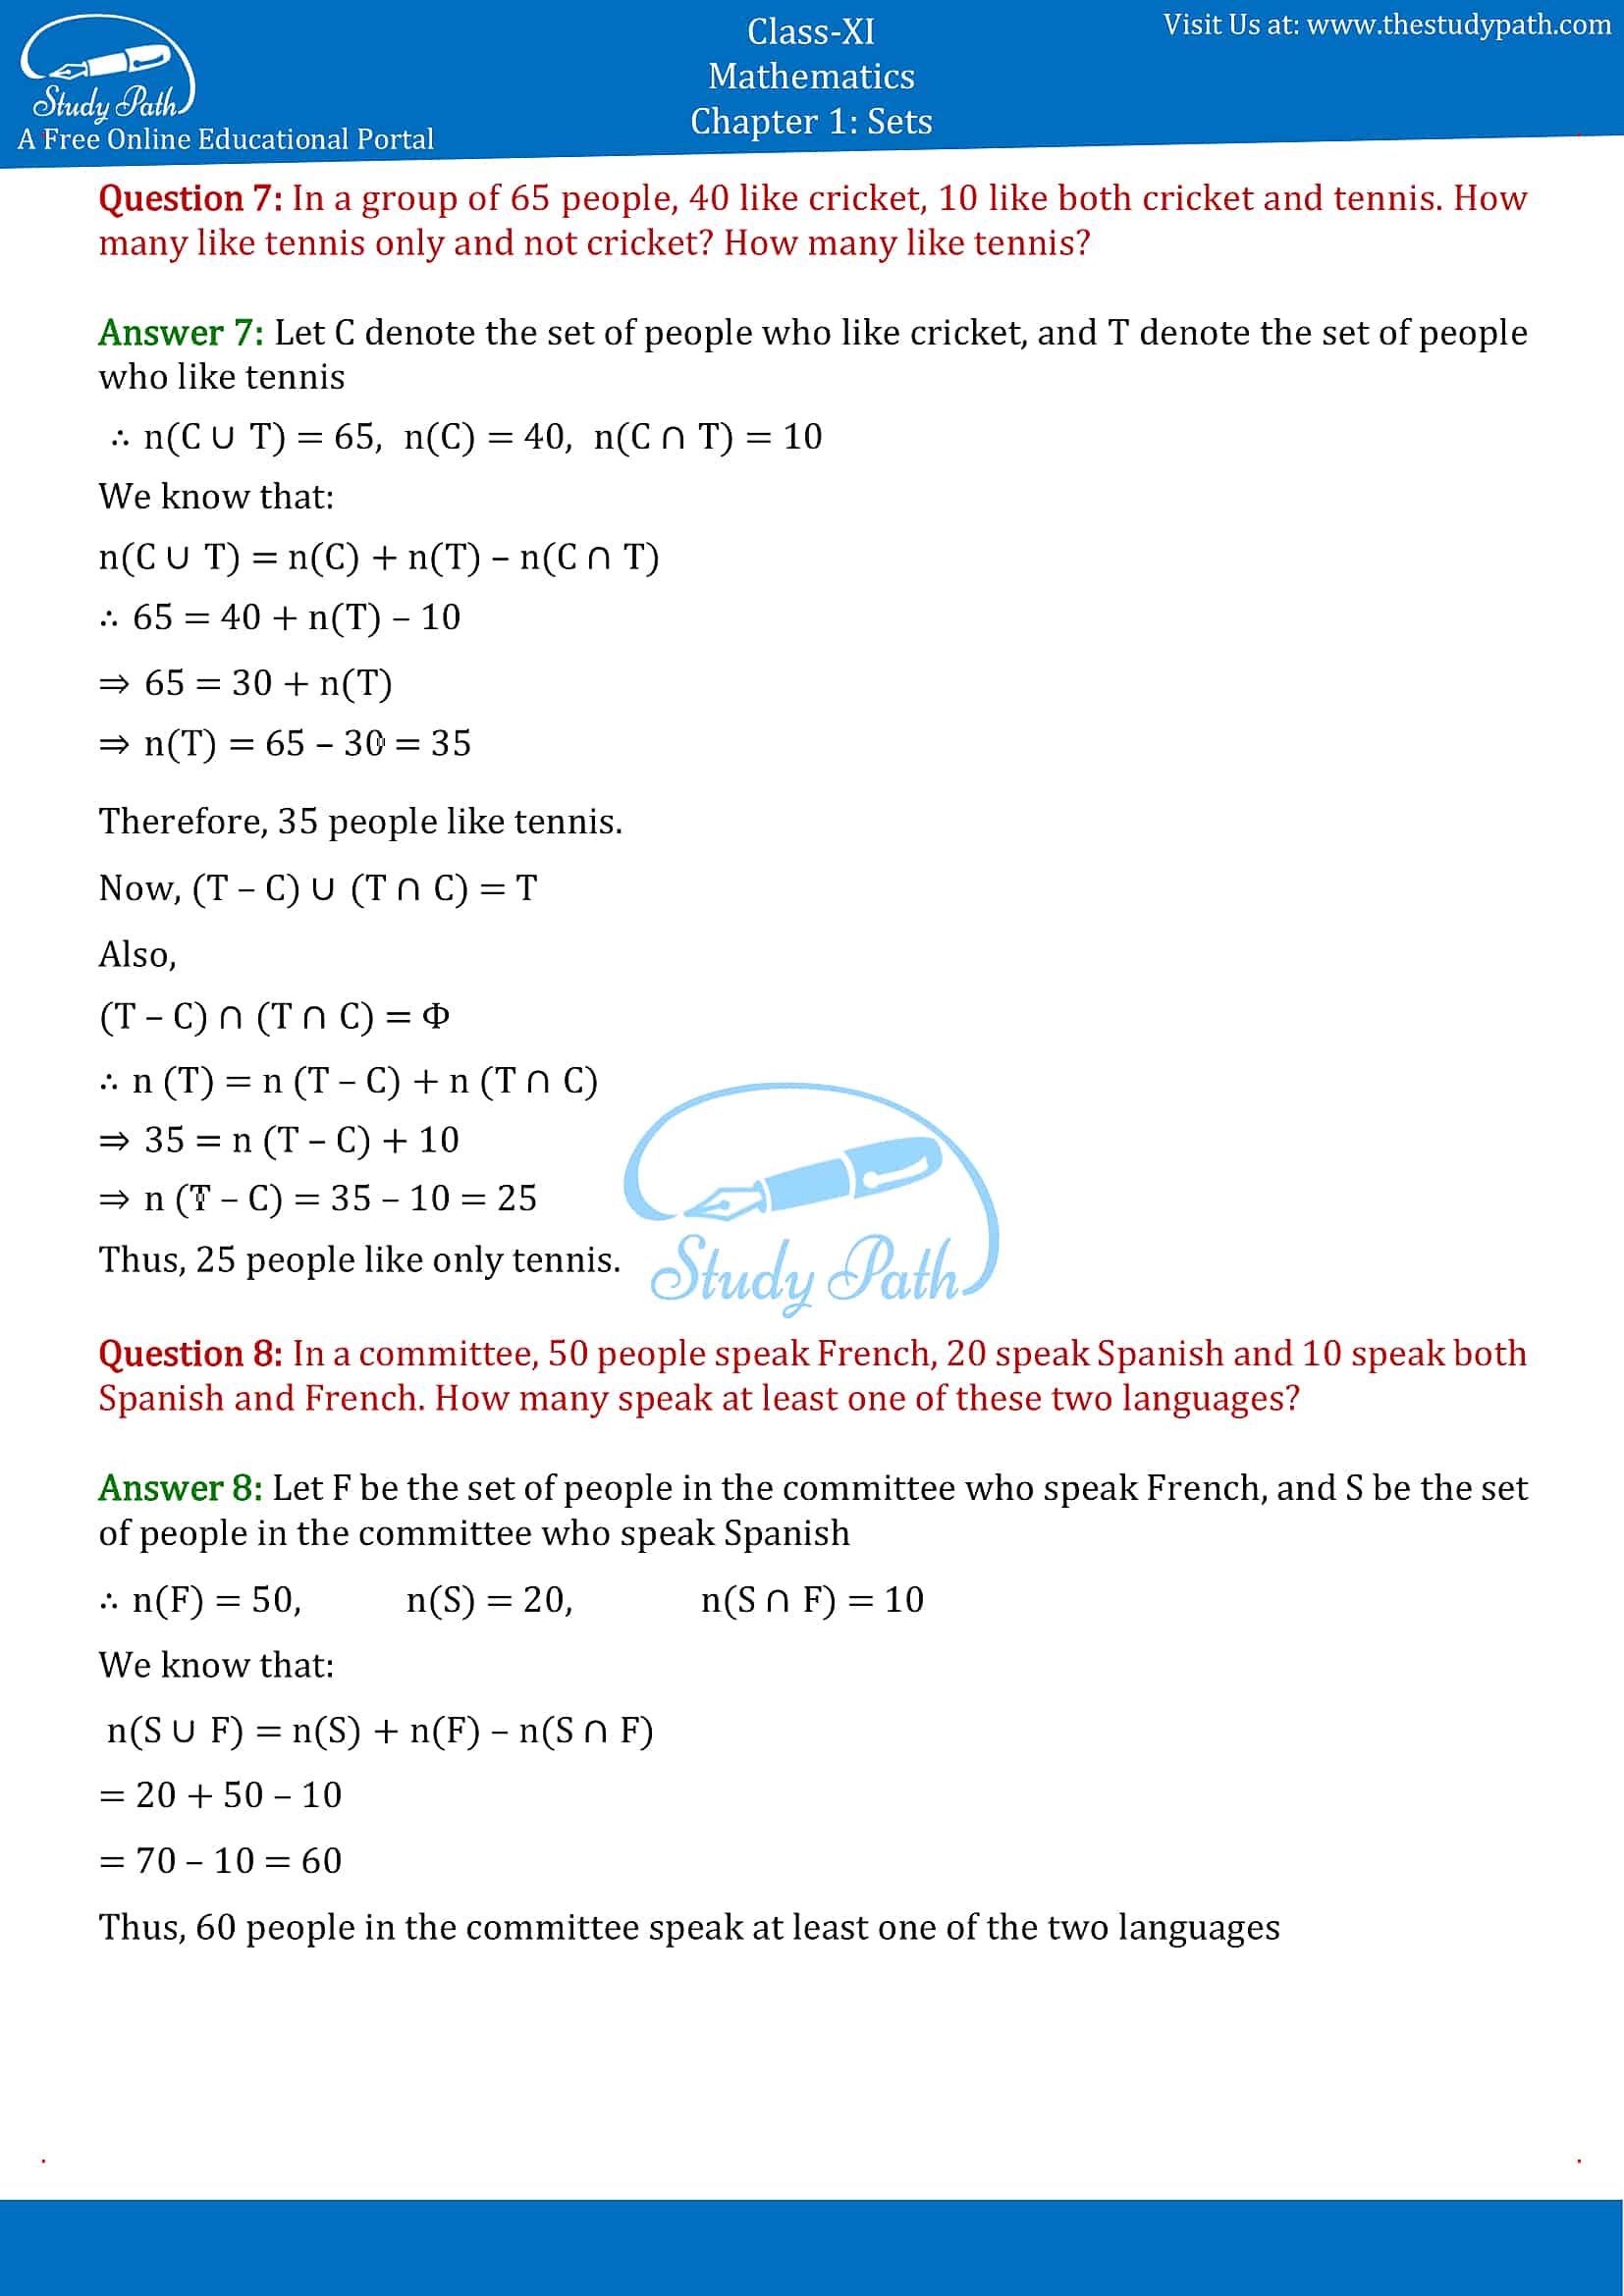 NCERT Solutions for Class 11 Maths chapter 1 sets Exercise 1.6